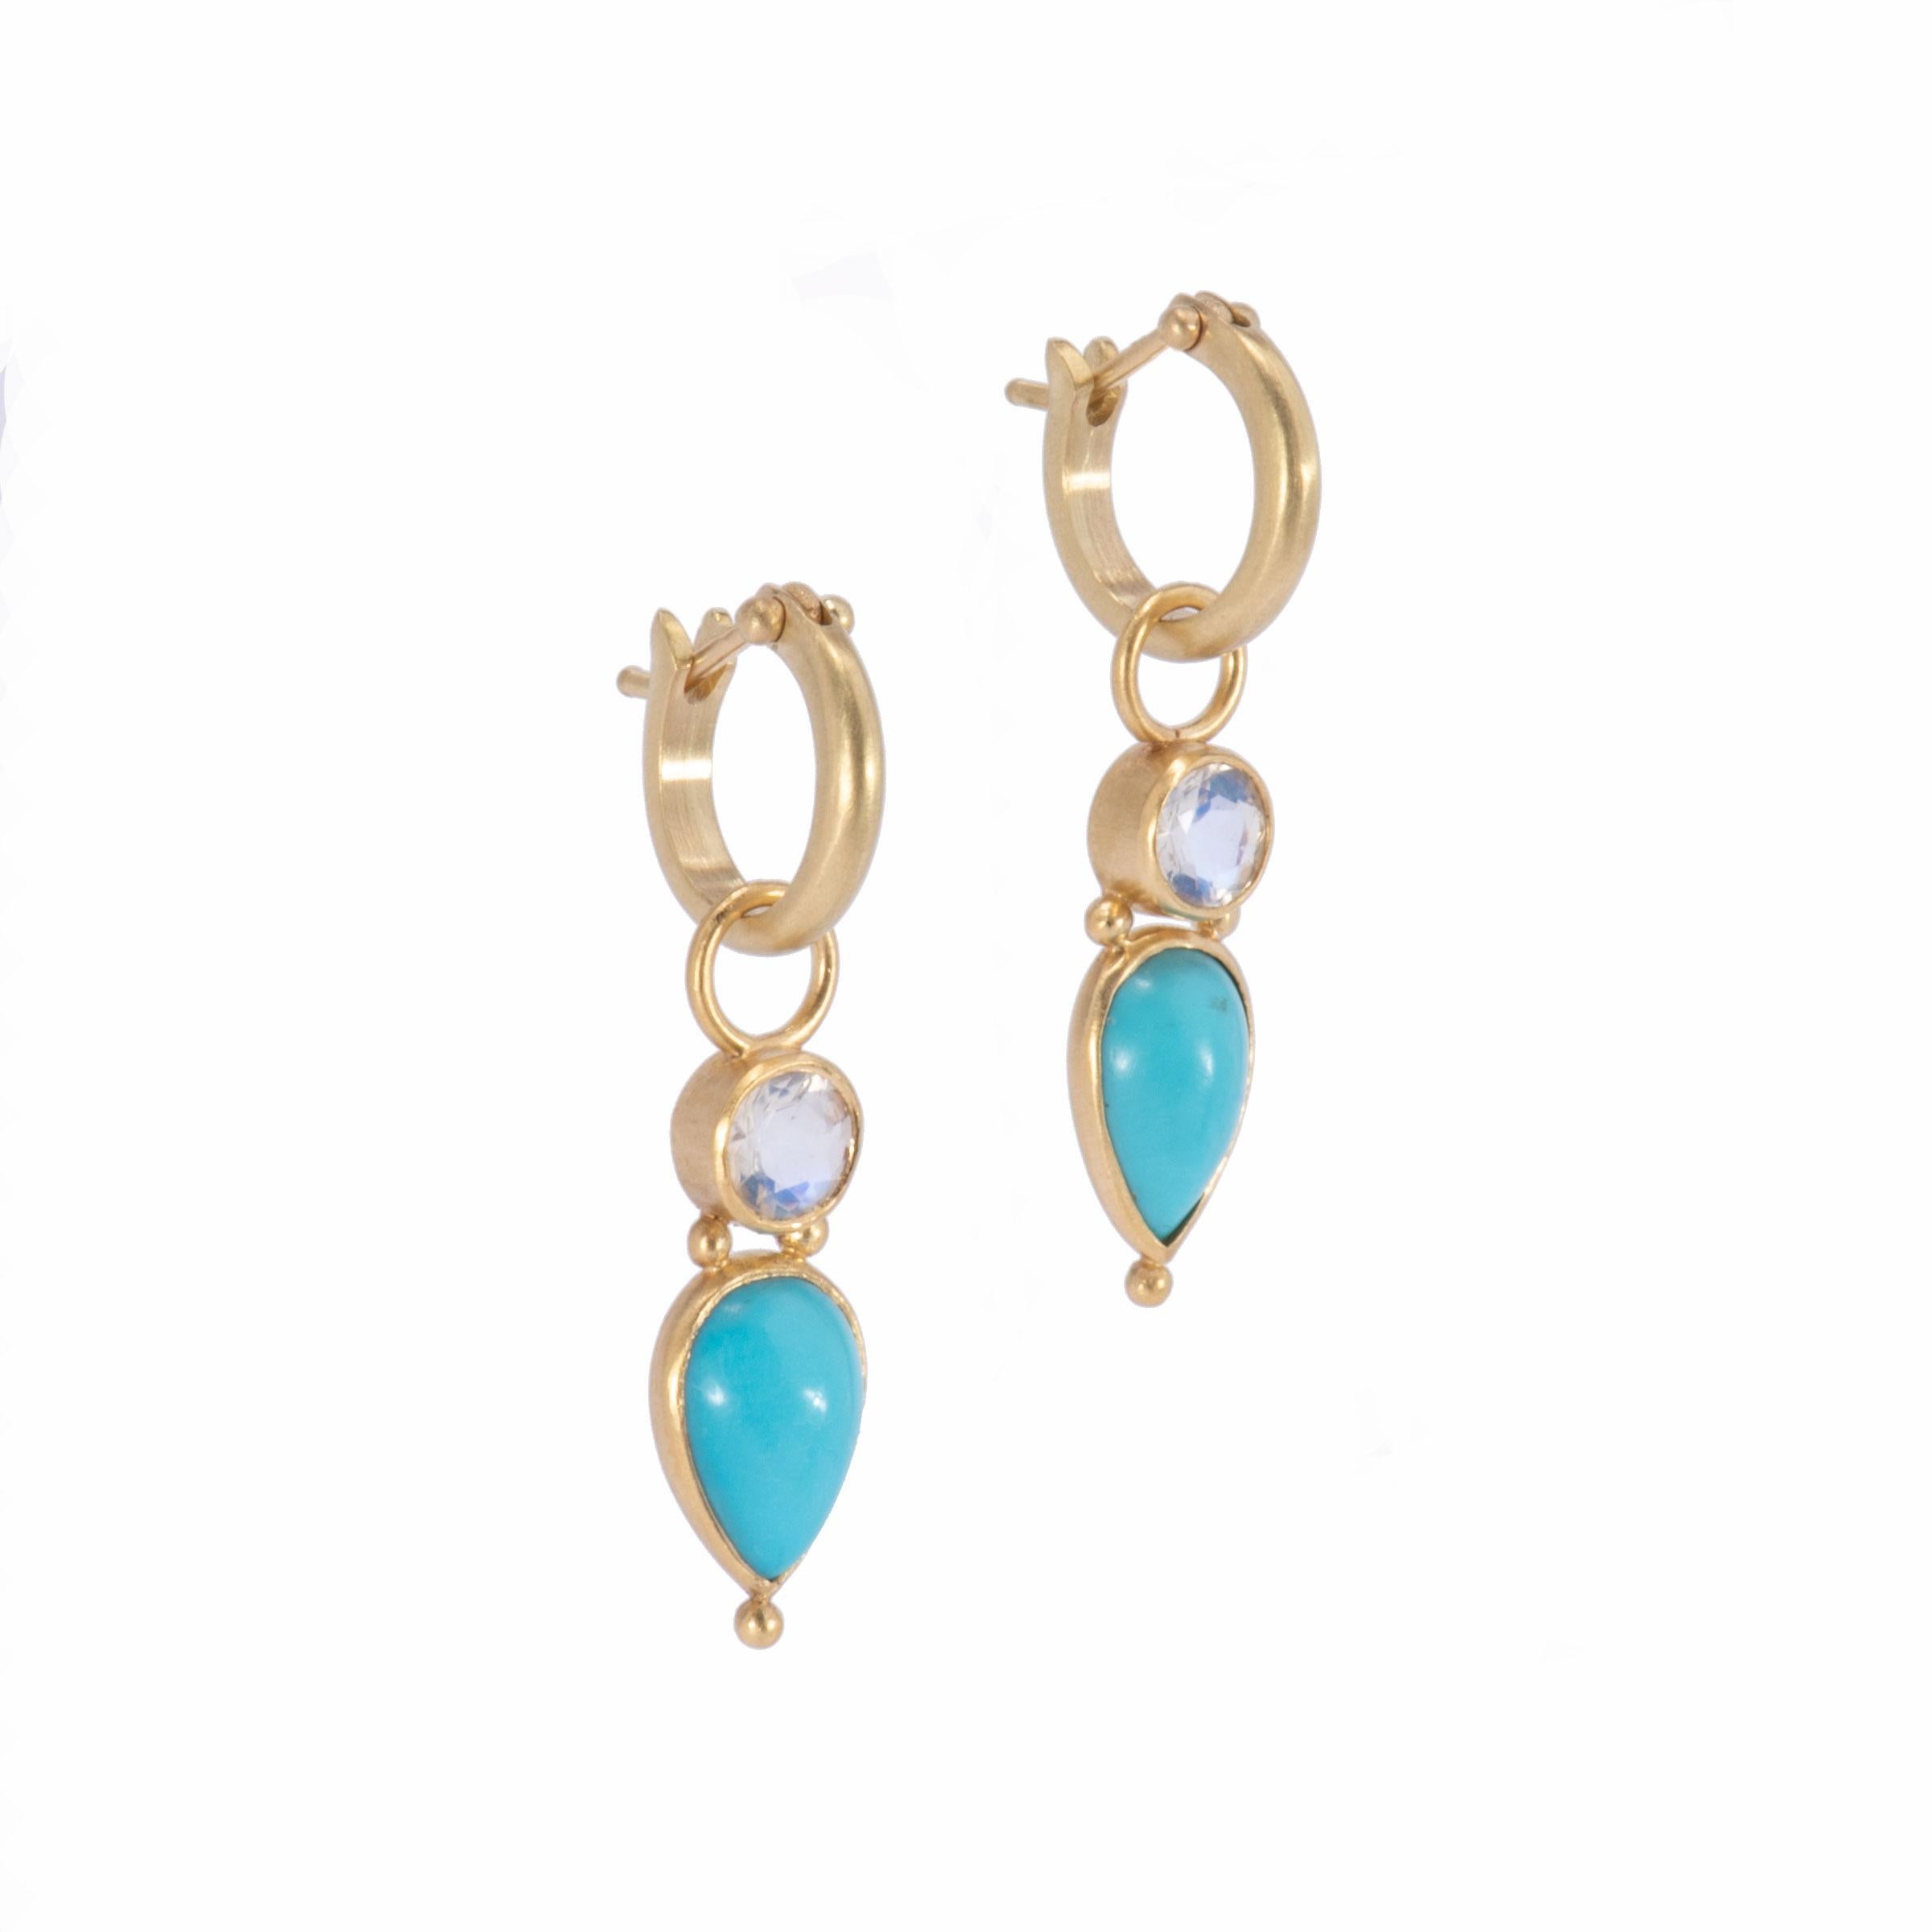 Lush tear drop cabochons of clear sky blue Persian Turquoise sit below faceted round moonstones set in 18k gold. Bezel set with our signature satin finish, these Persian Turquoise & Moonstone Drop Earrings hang from small plain hoops in 18k gold